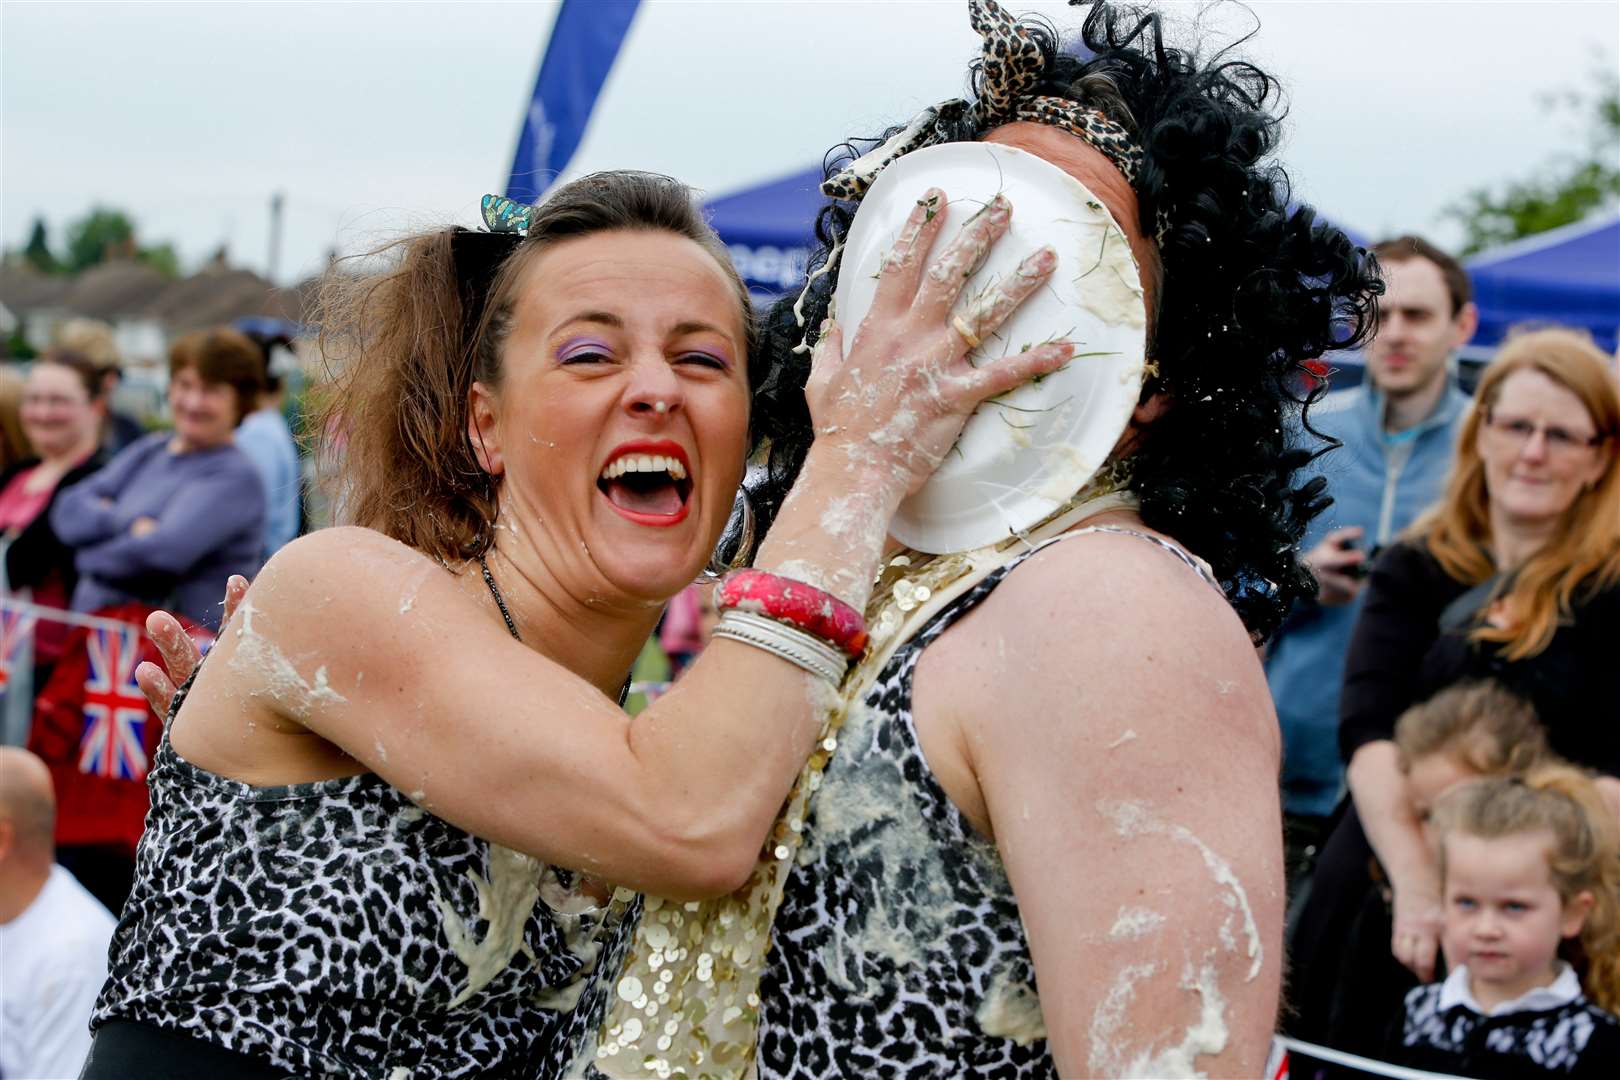 Messy scenes from last year's Custard Pie Championships